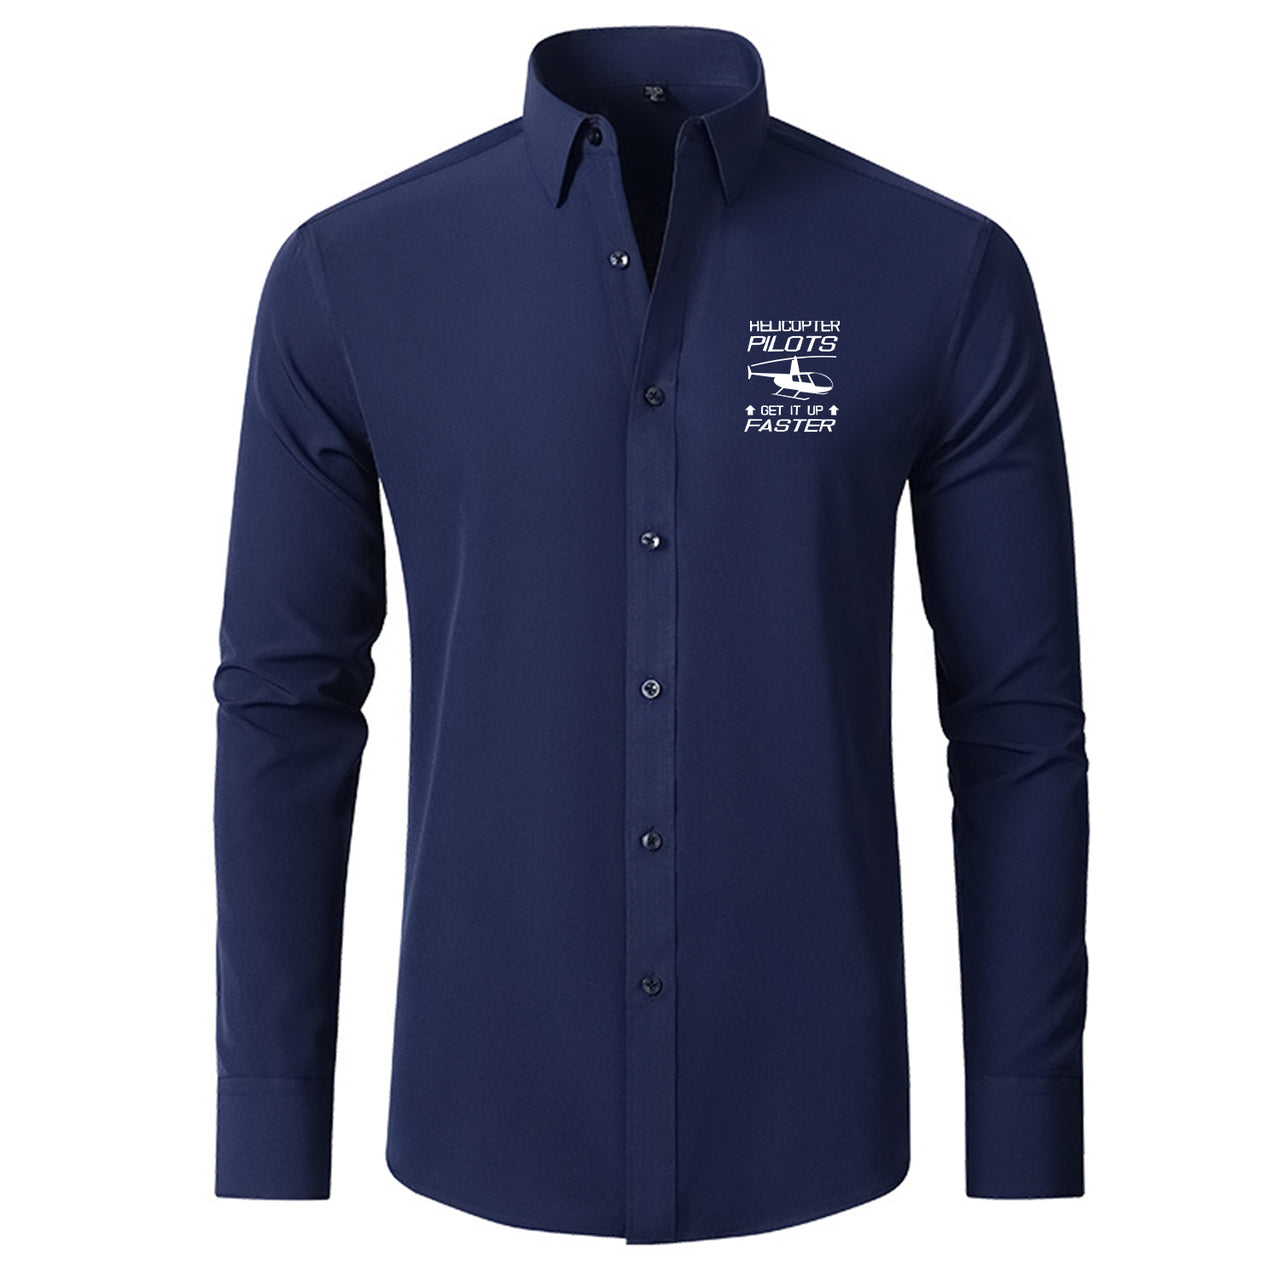 Helicopter Pilots Get It Up Faster Designed Long Sleeve Shirts